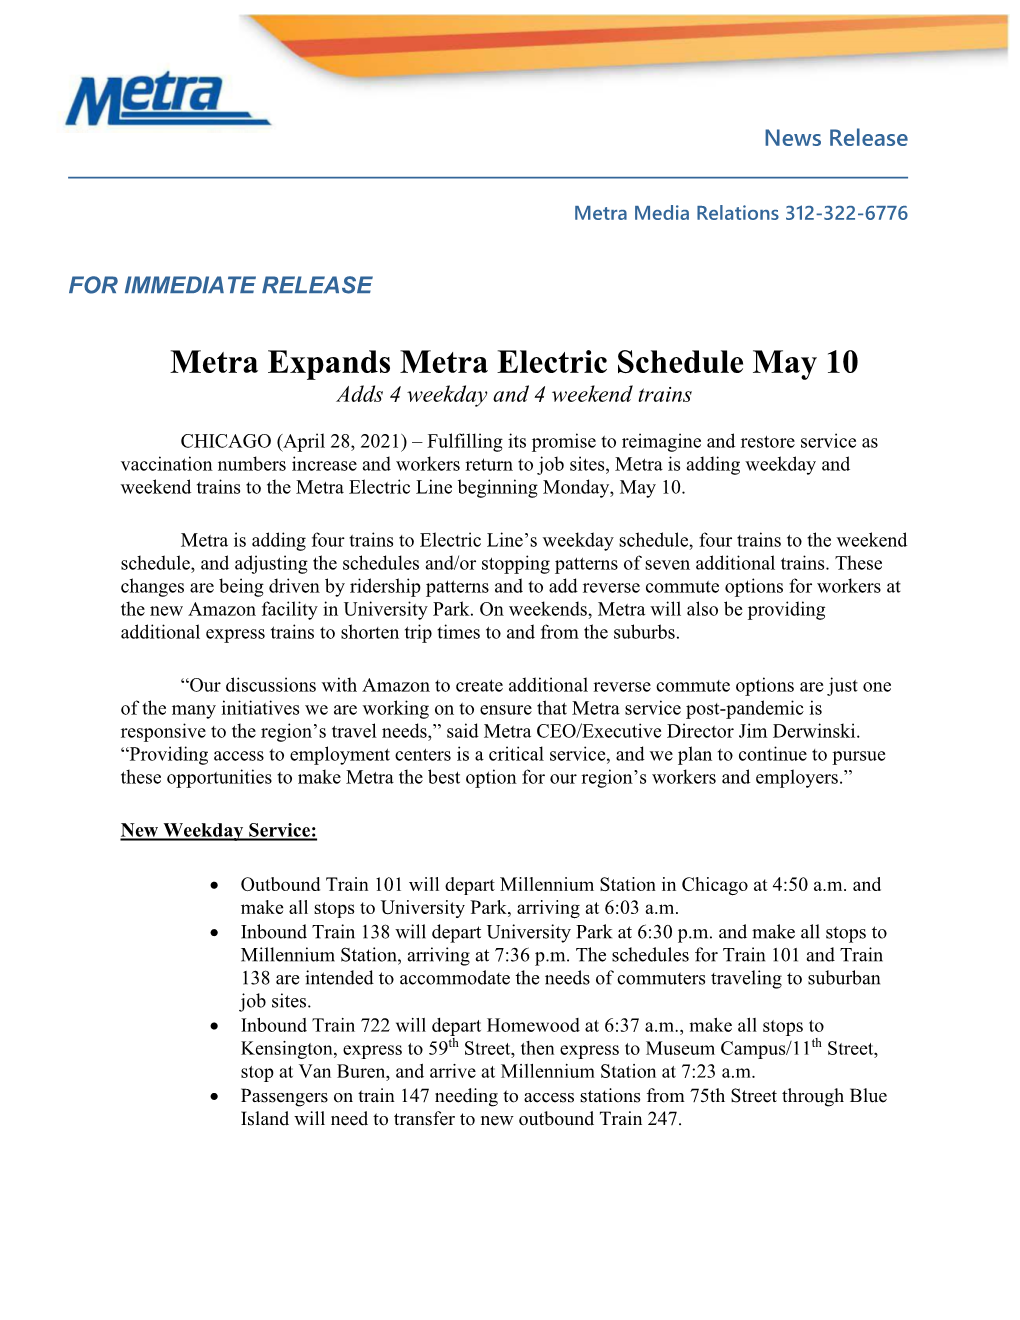 Metra Expands Metra Electric Schedule May 10 Adds 4 Weekday and 4 Weekend Trains